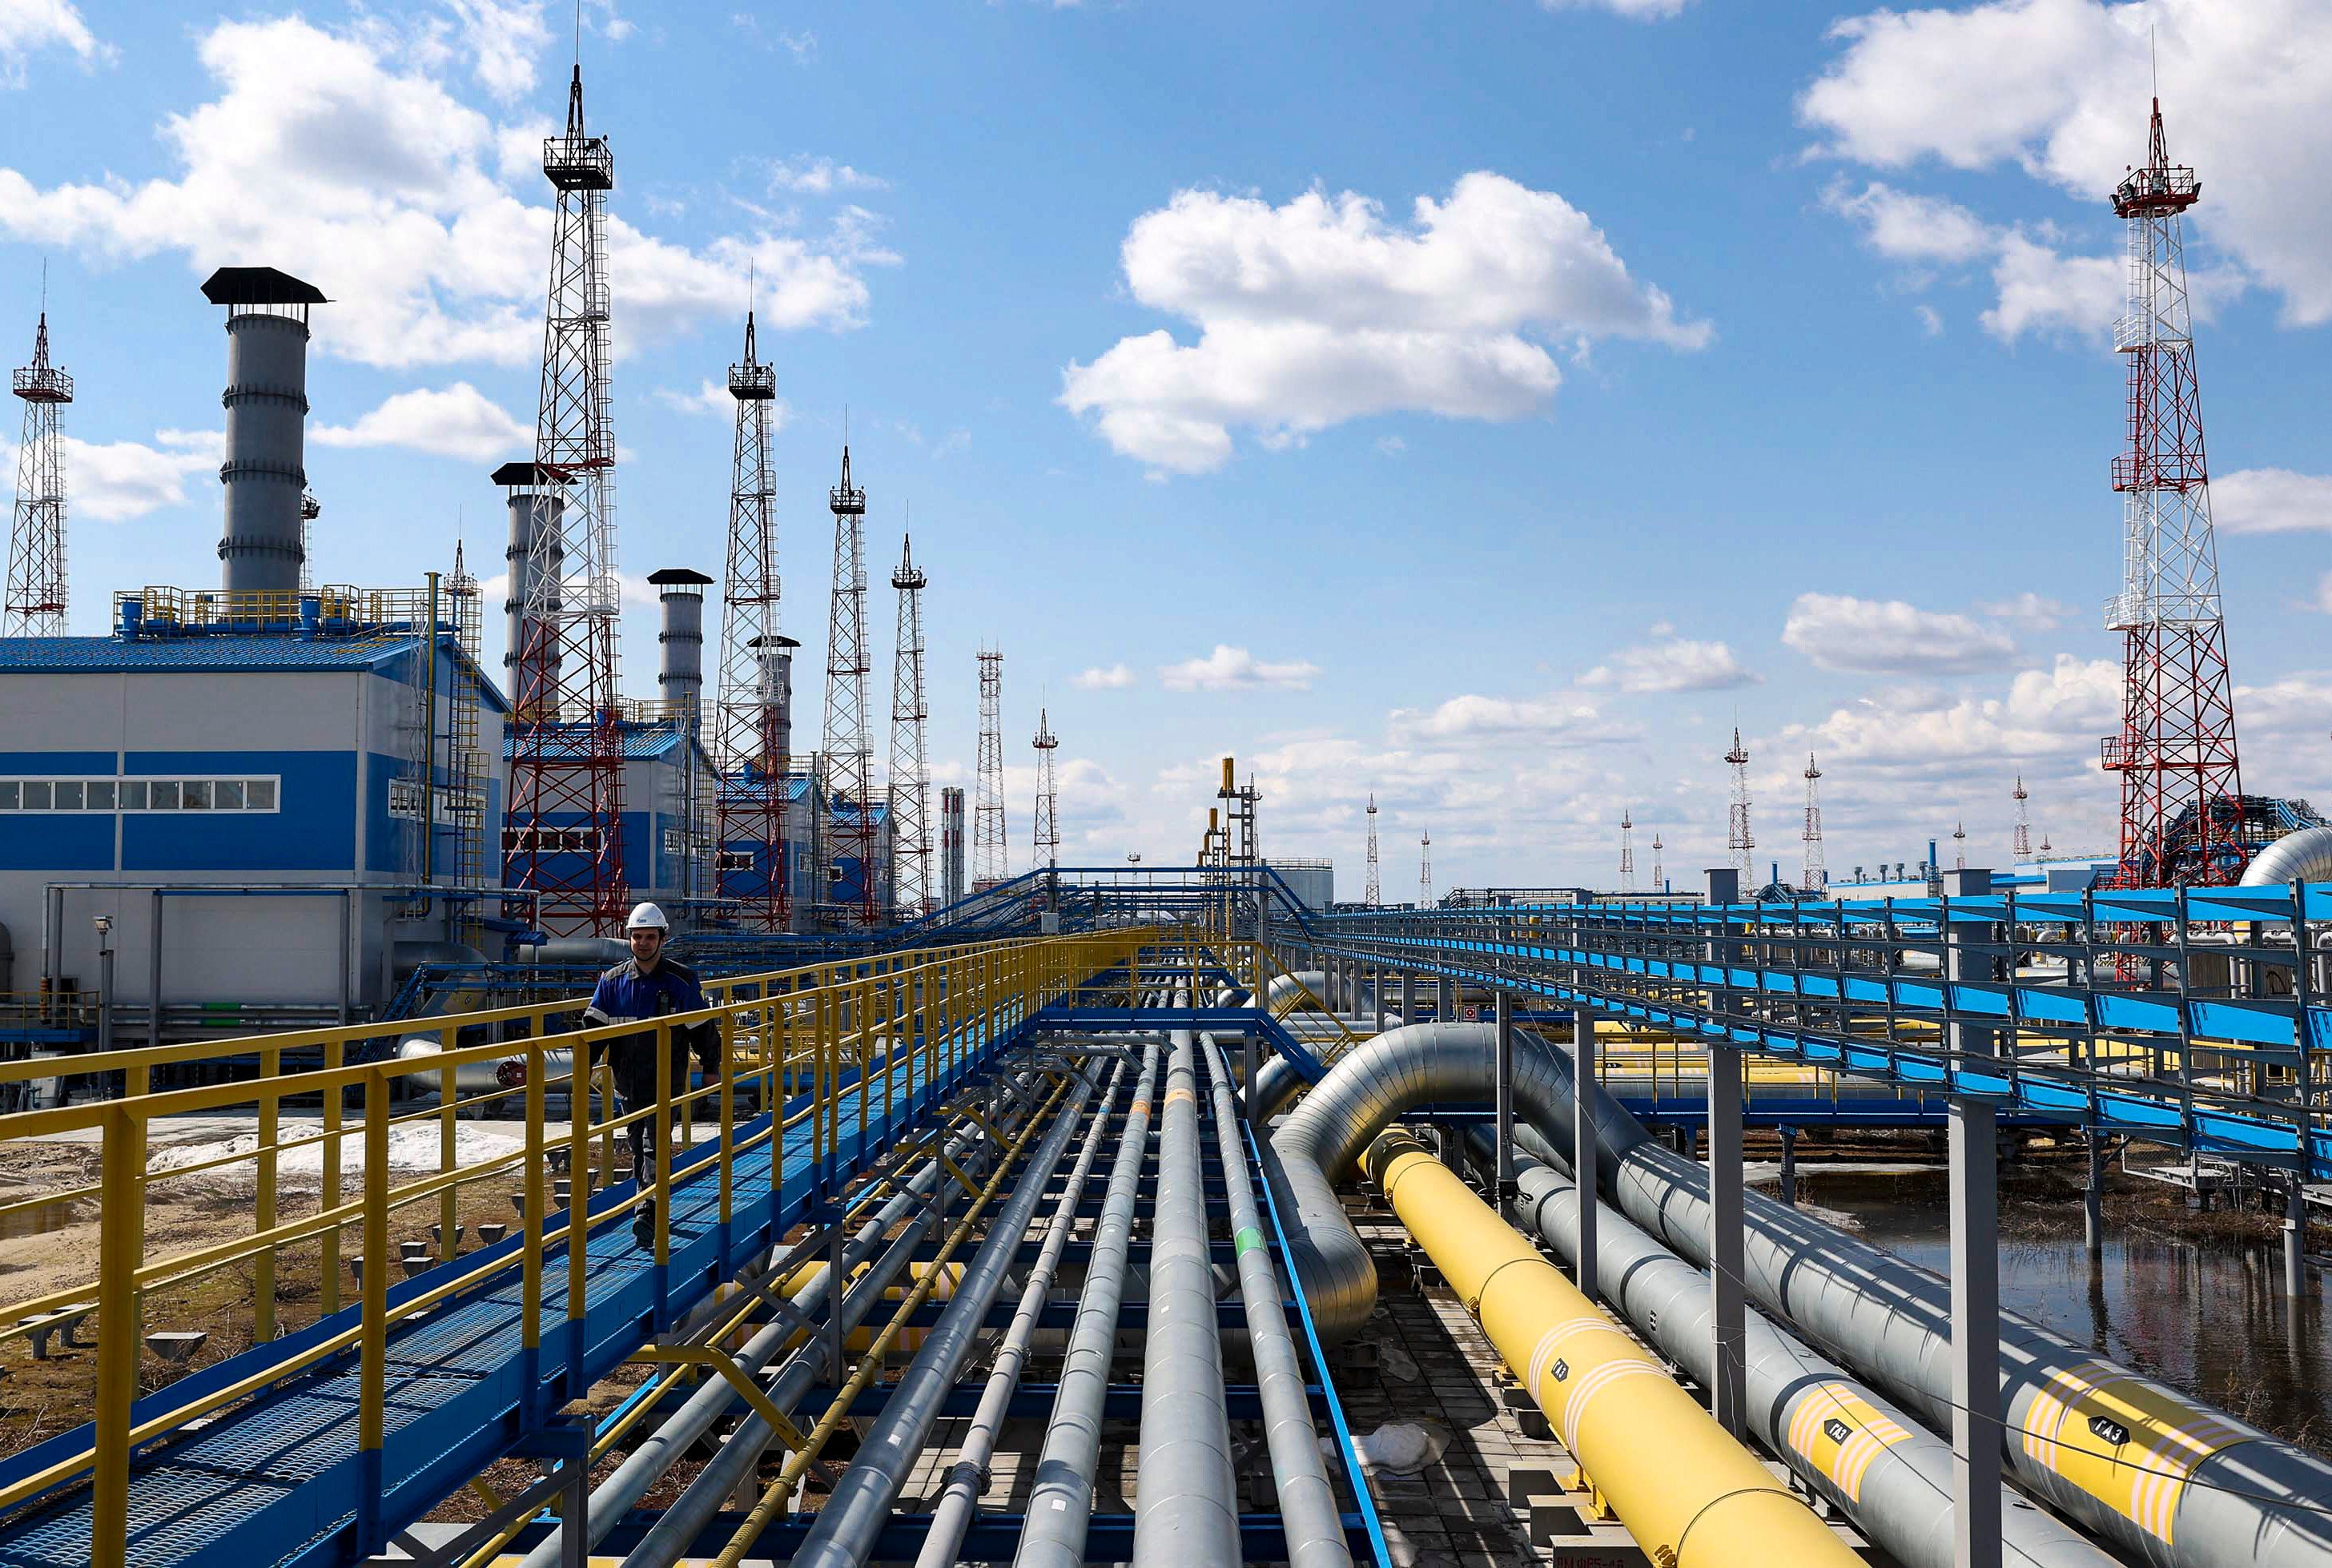 A gas treatment facility at Gazprom’s Chayanda oil and gas field in Russia. Photo: TNS